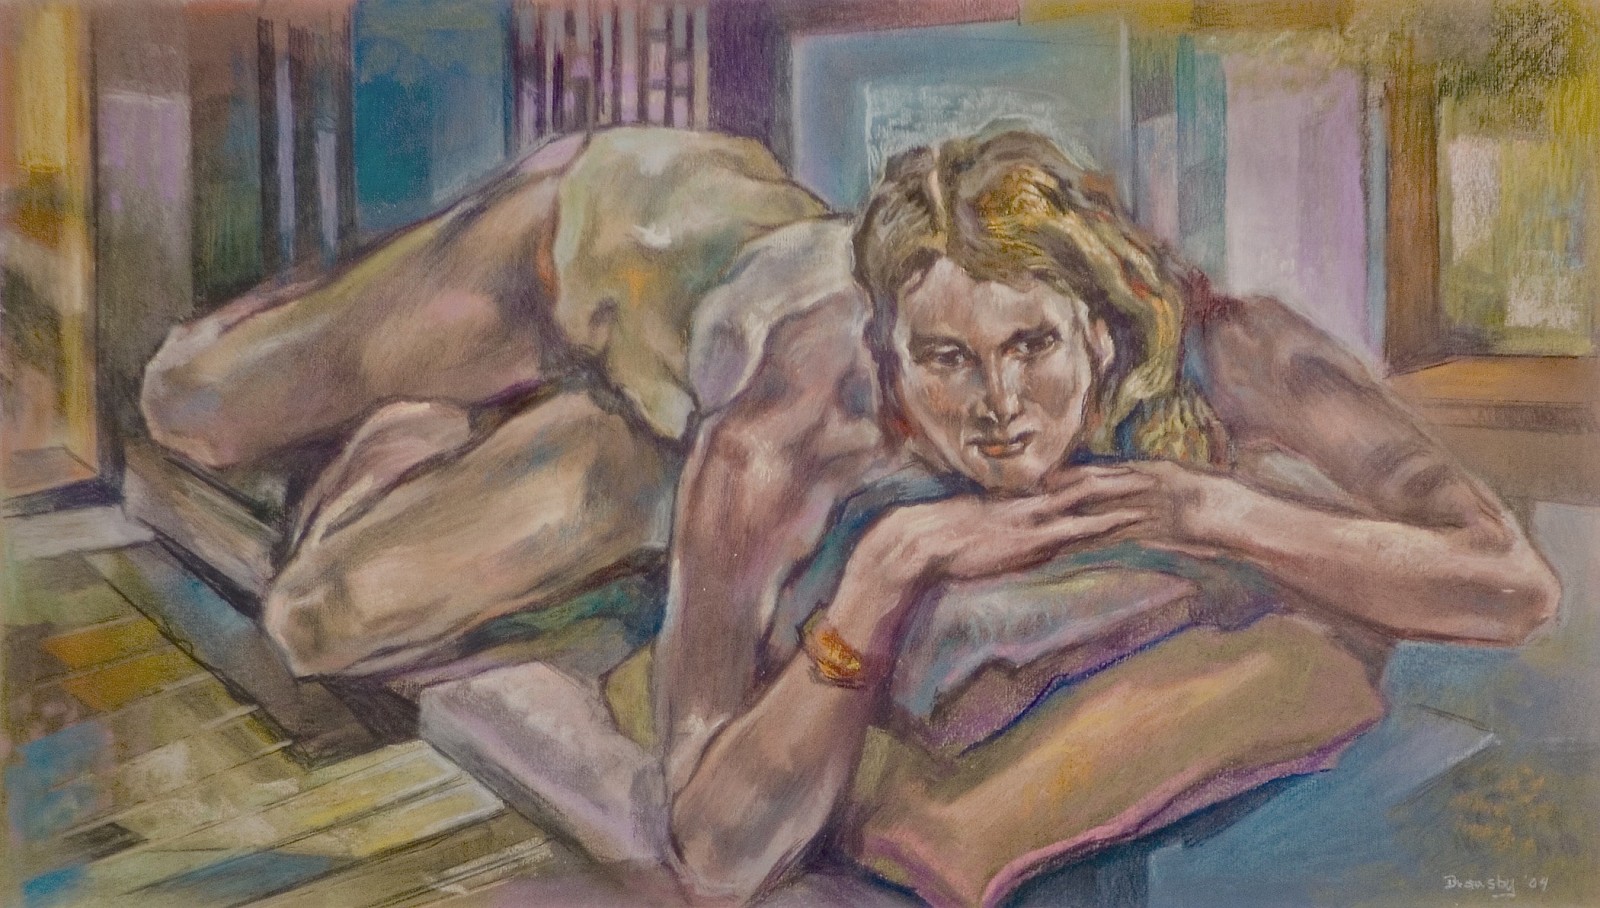 Eric Bransby
Reclining Figure, 2004
pastel on paper, 12 x 21 1/2 in.